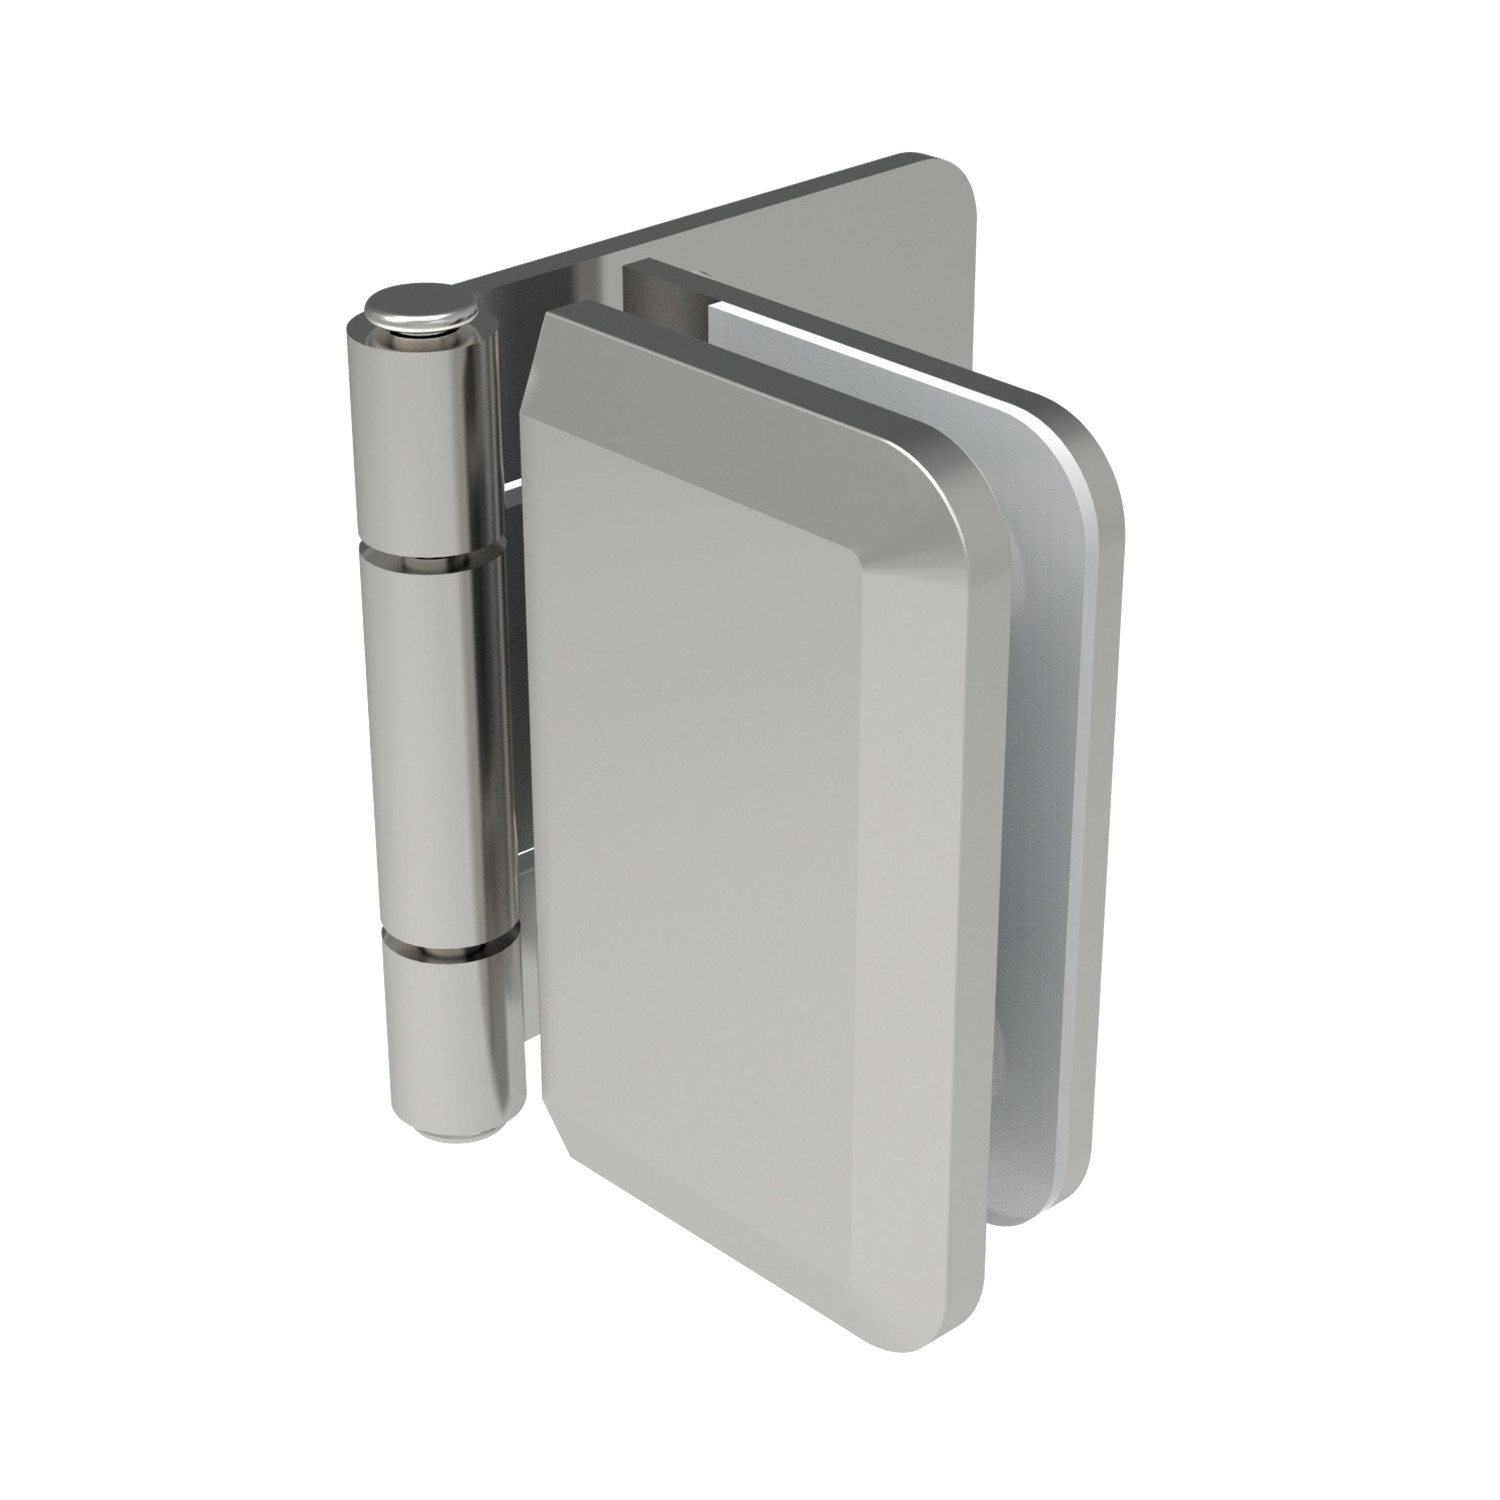 Glass Door Hinge - Inset Type Stainless steel inset hinges for door thickness of 5 - 8 mm. Drilling holes in the glass surface is required for fitting.